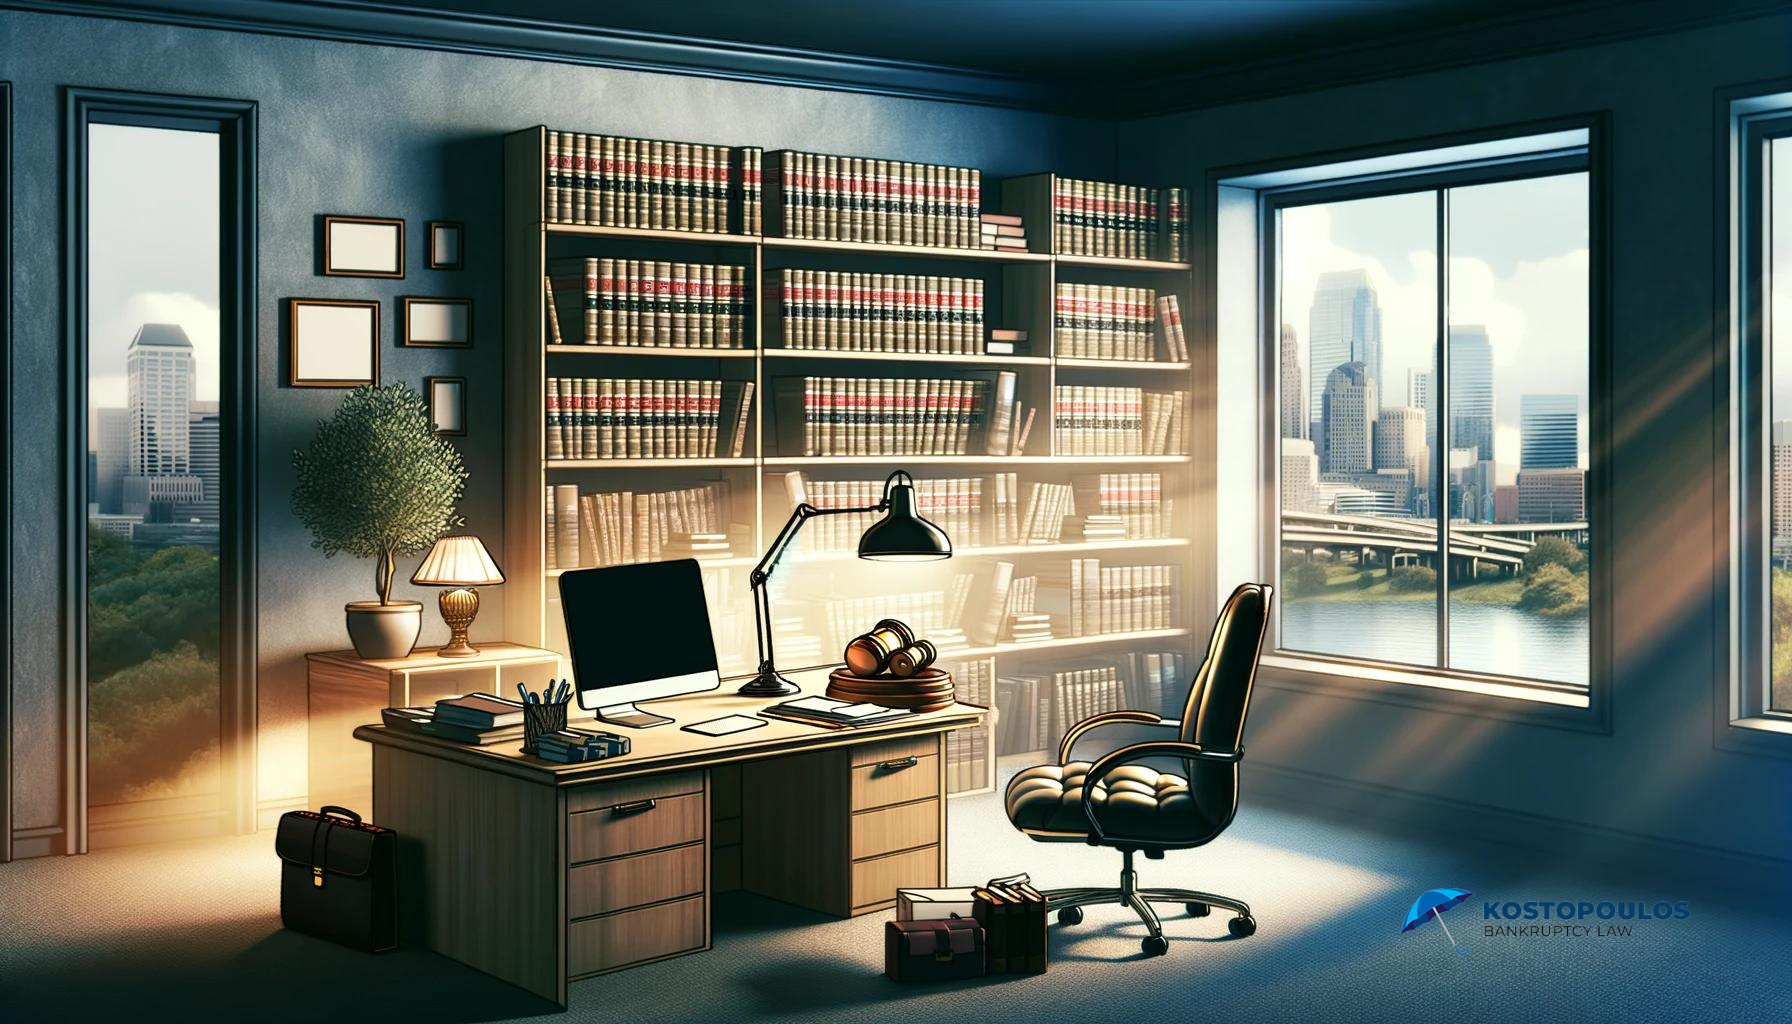 A tranquil office setting showcasing an organized desk and a welcoming atmosphere, symbolizing the guidance provided by bankruptcy attorneys.